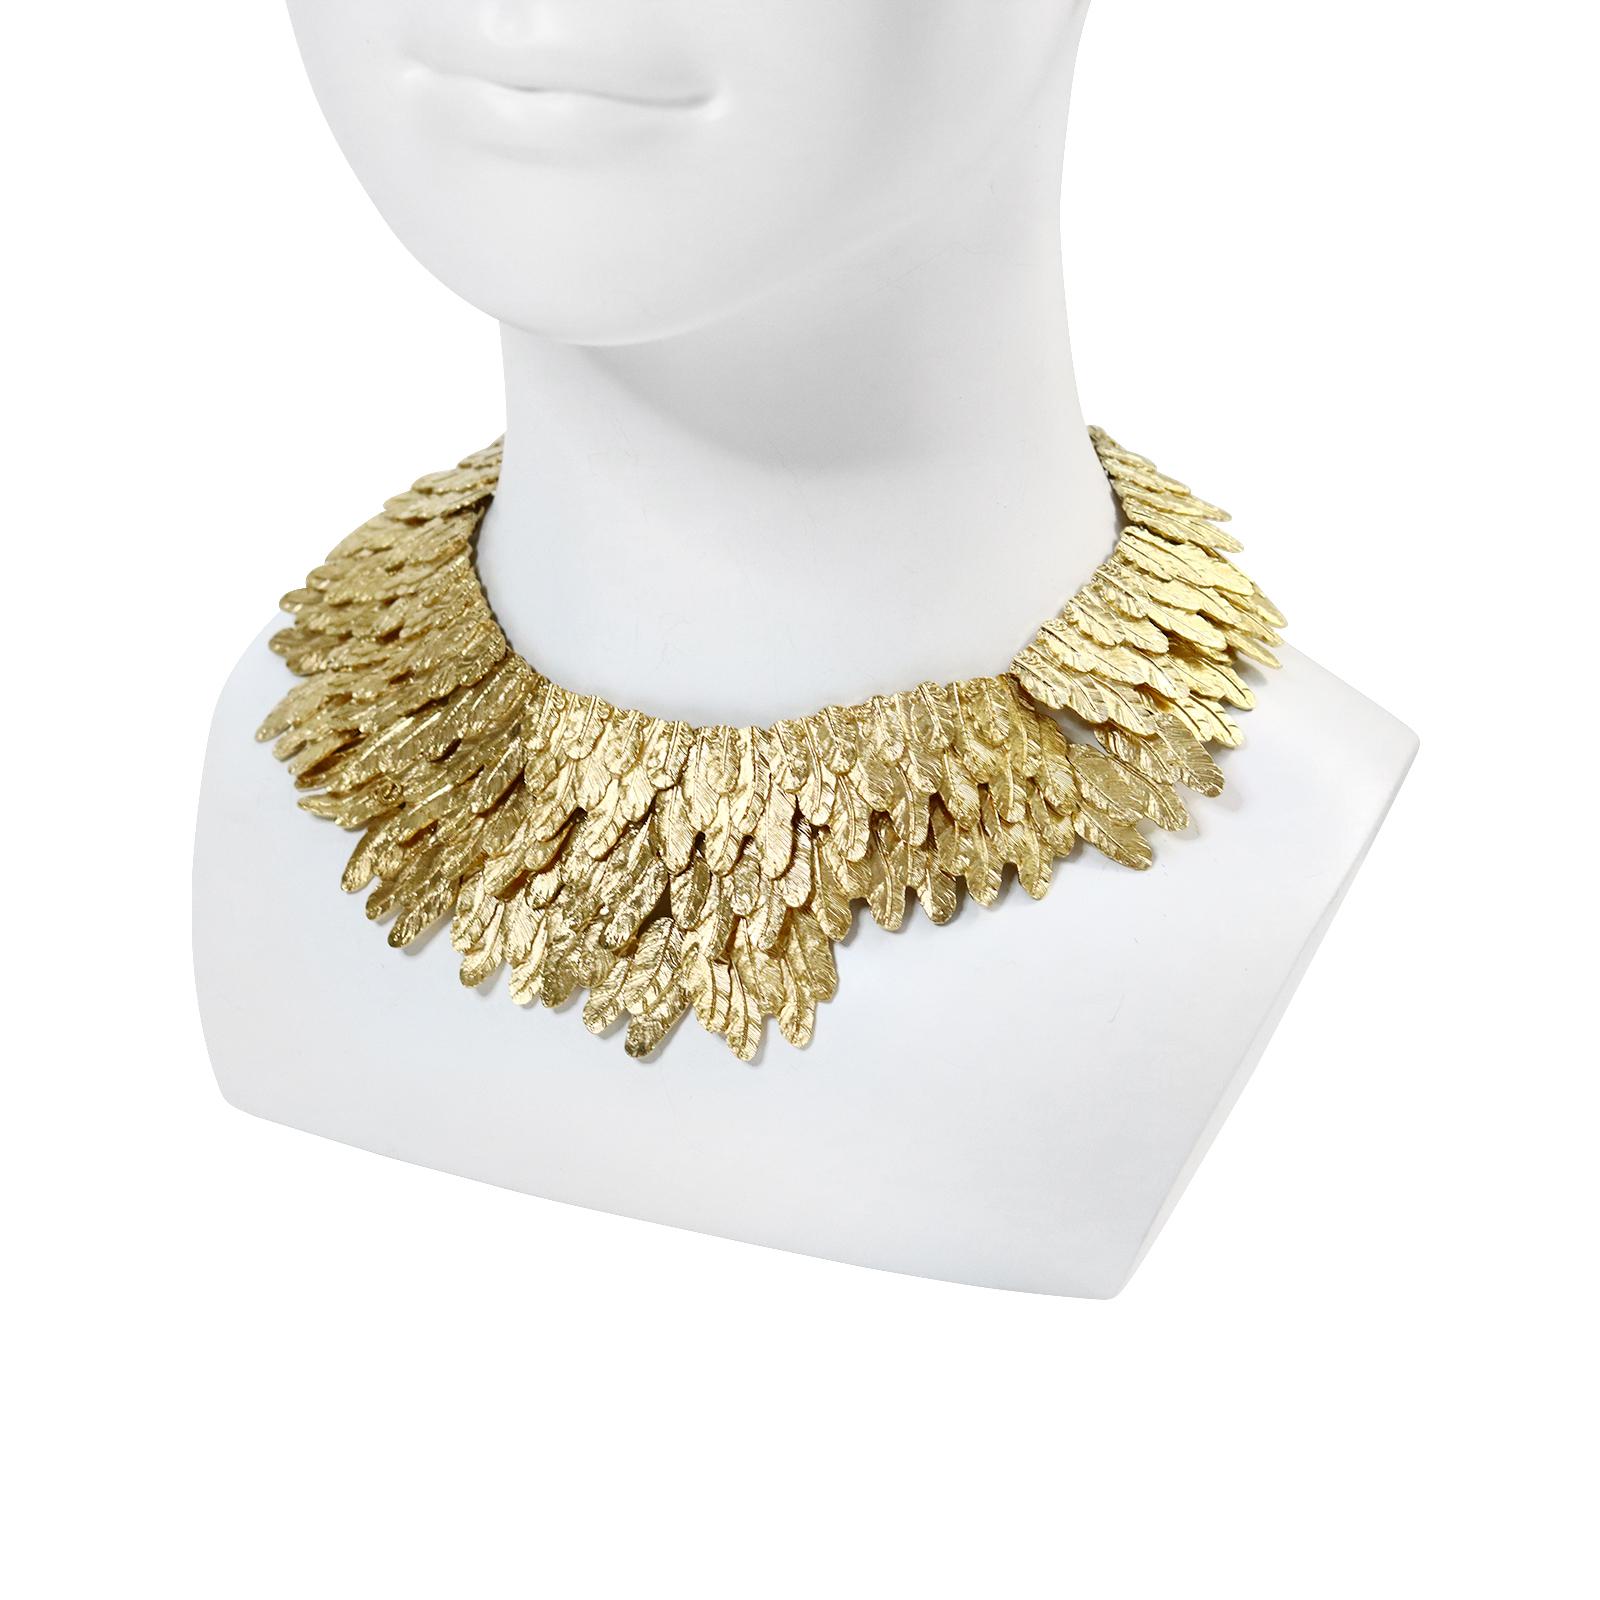 Collectible Chanel Gold Choker Necklace Circa 2008 In Excellent Condition For Sale In New York, NY